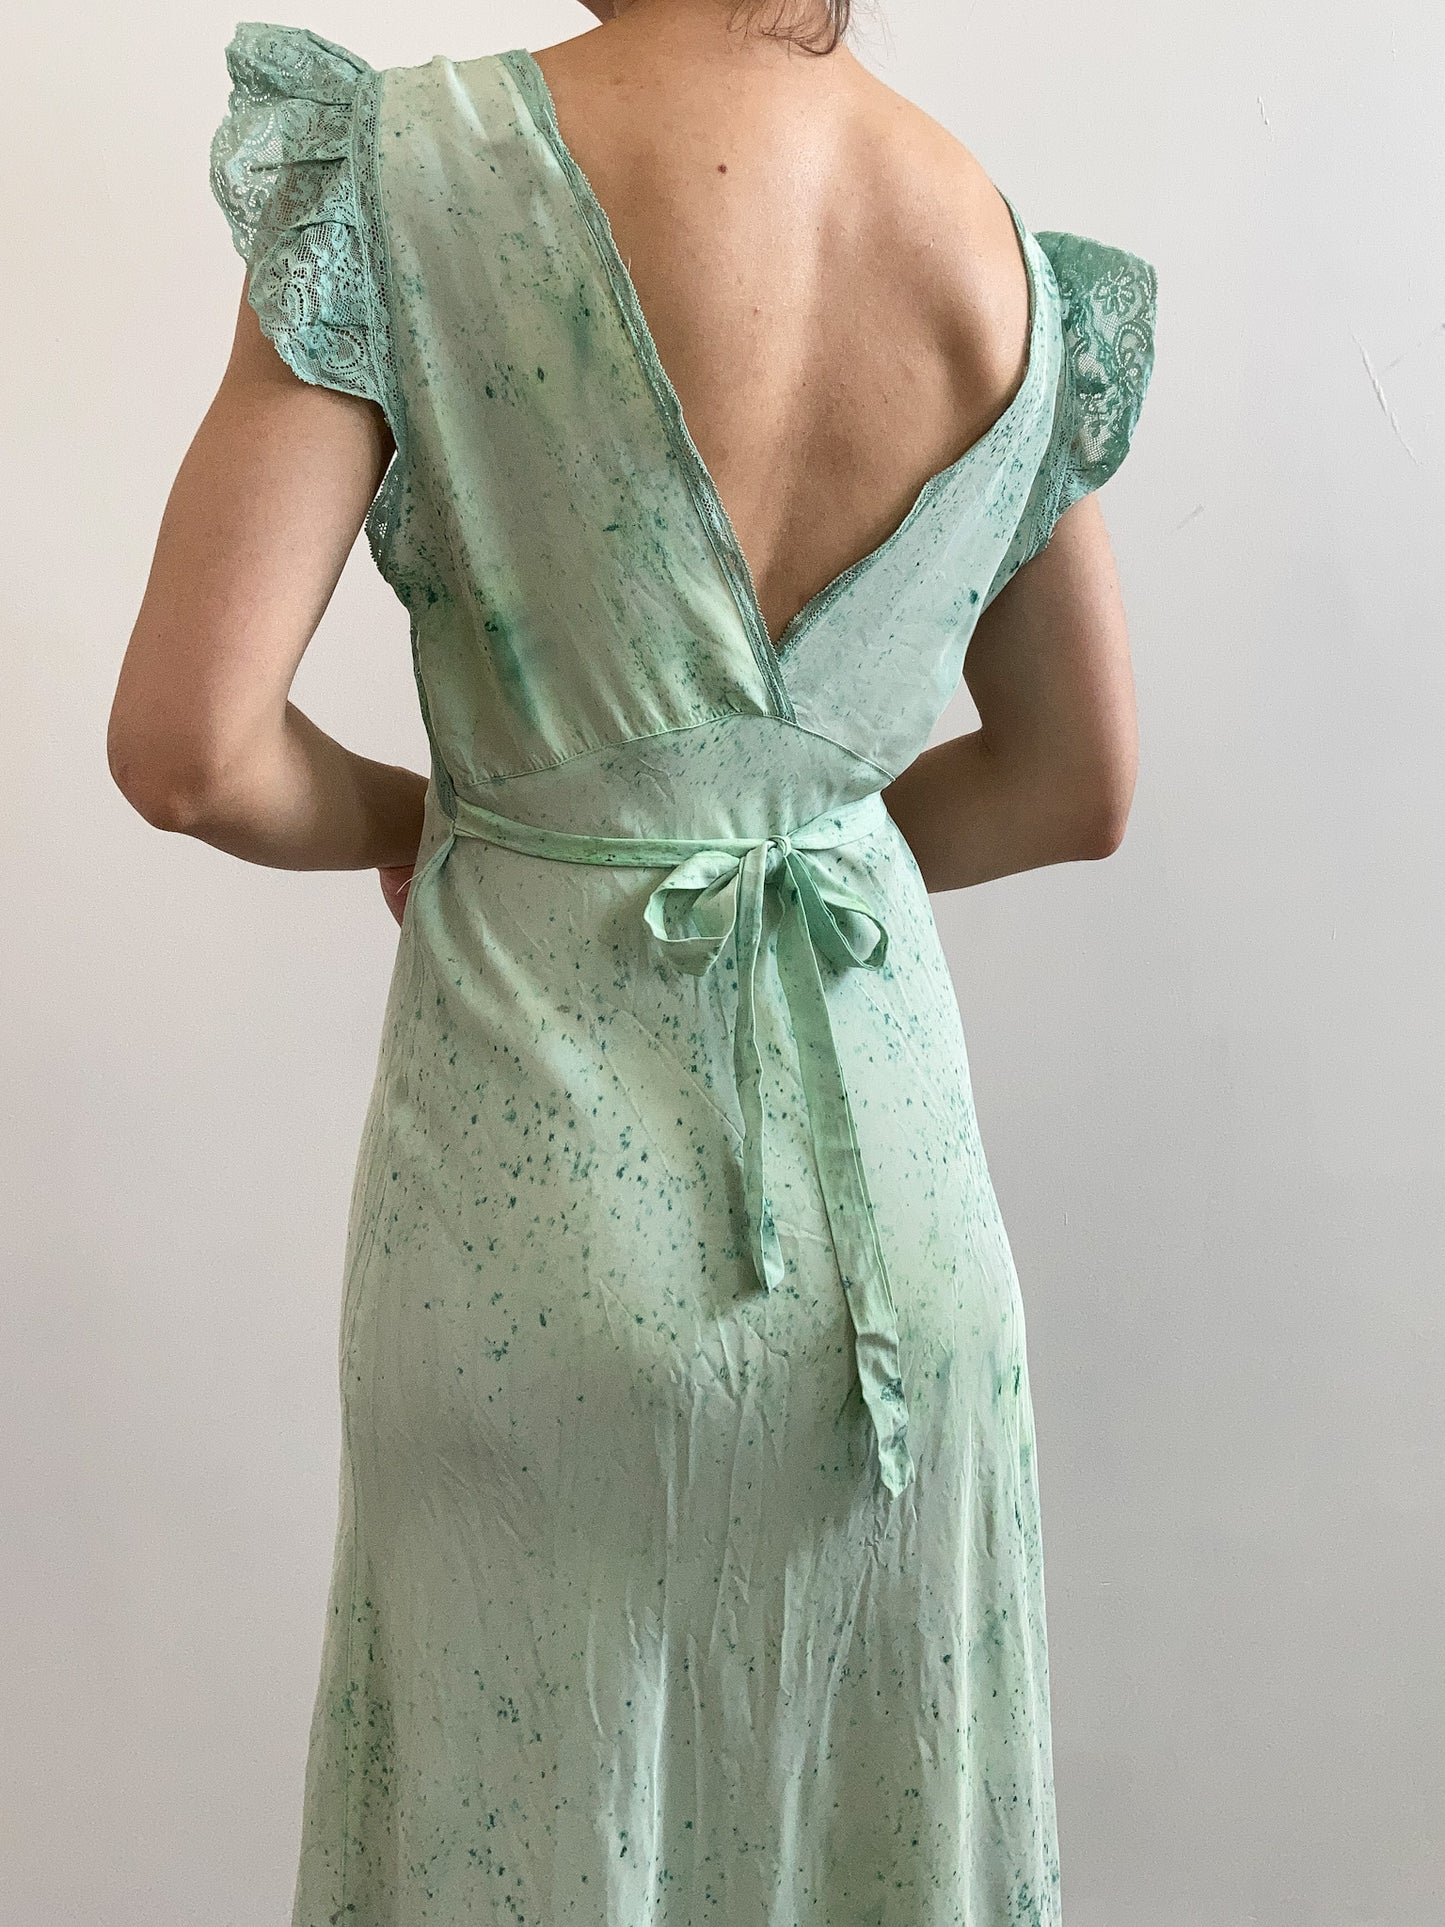 1940s Cap Sleeve & Lace Dyed Slip Gown - Seafoam